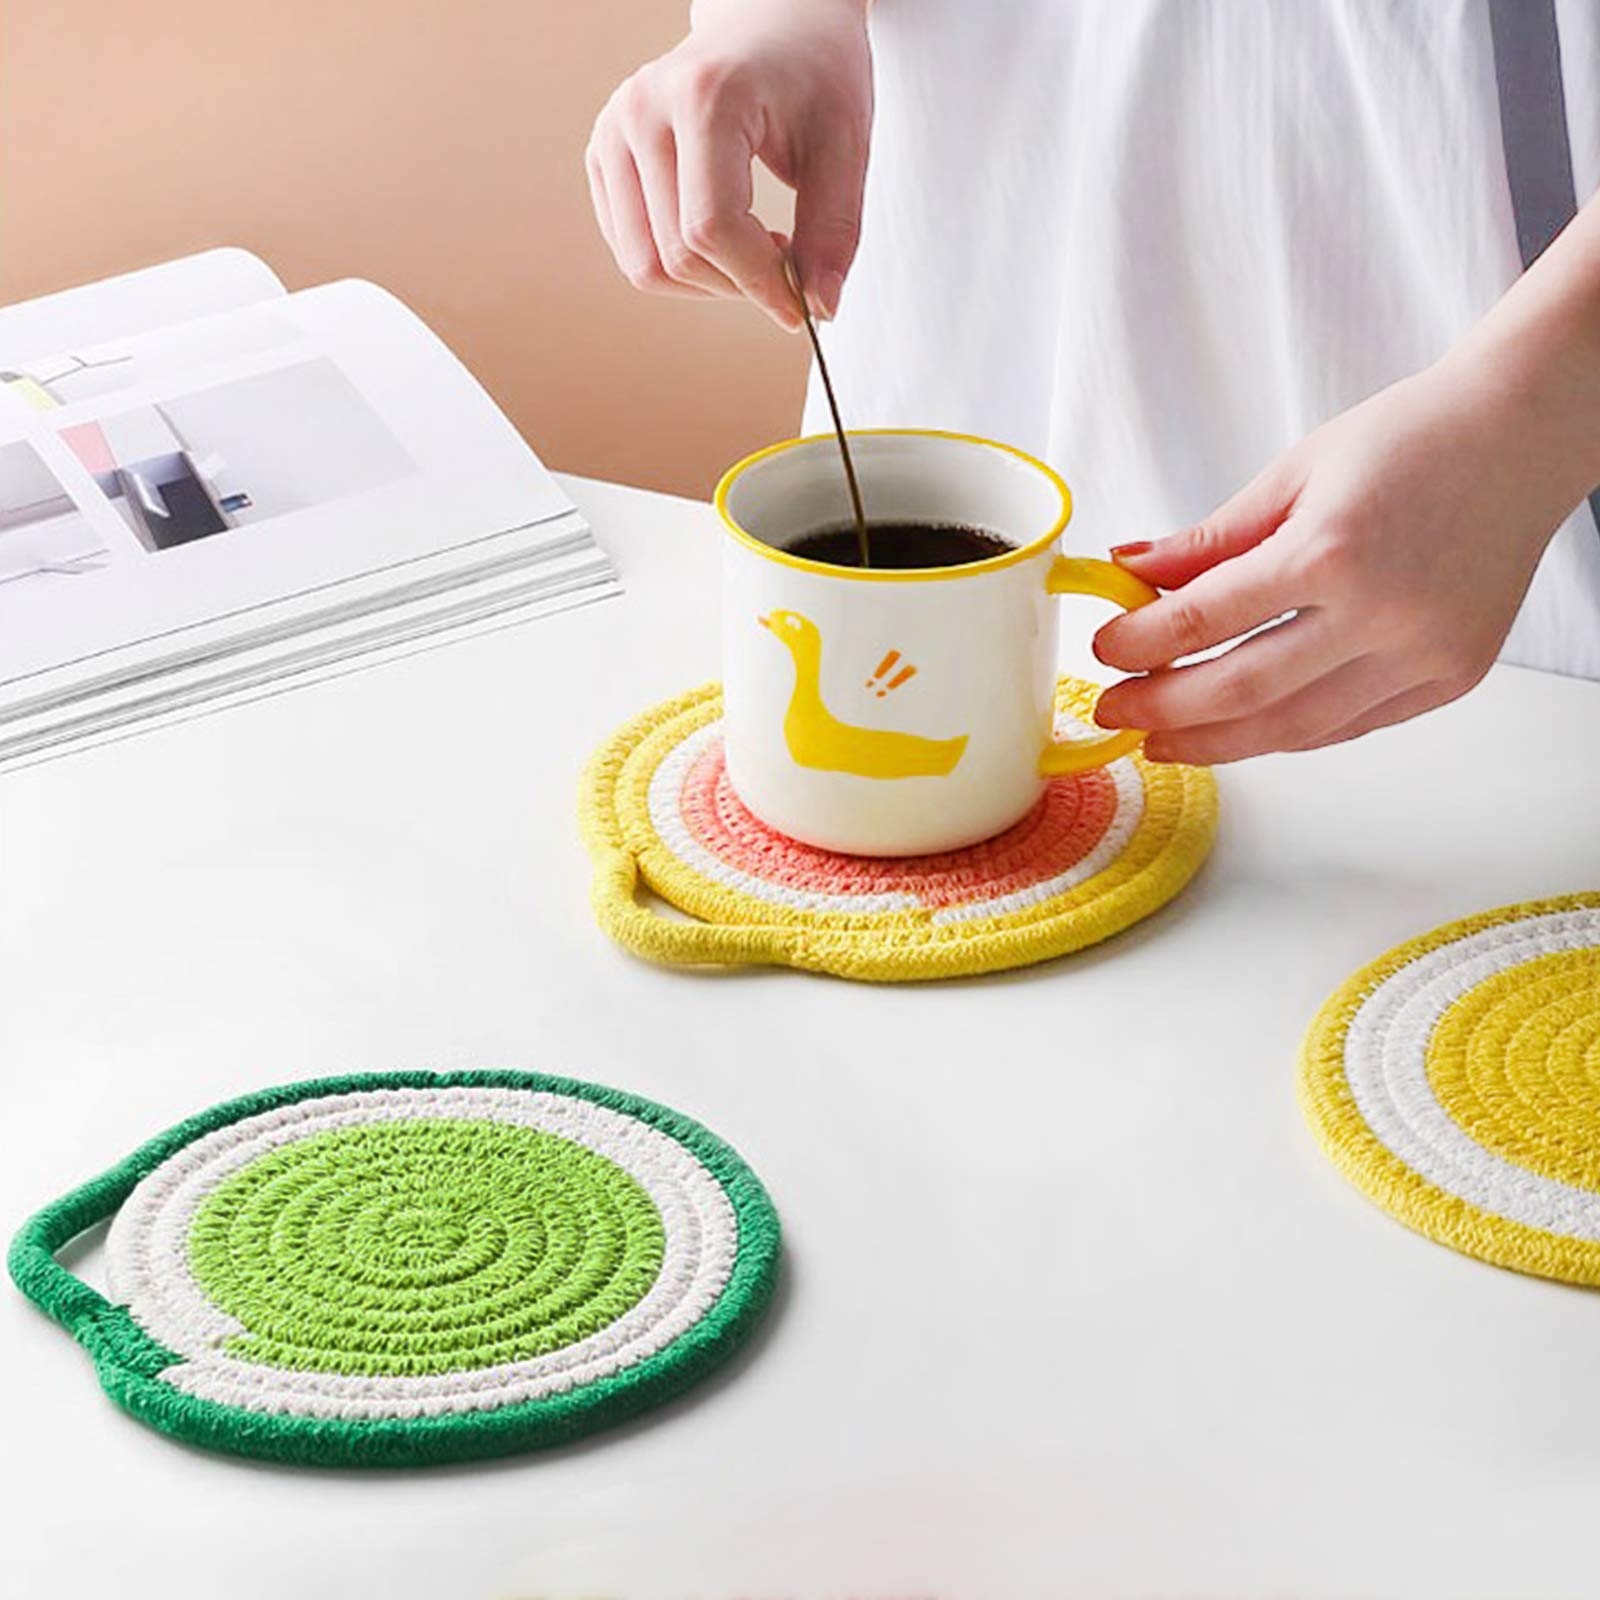 Kitchen Pot Holders Set Trivets Set, Cotton Thread Weave Hotpads for Cooking (Set of 3) Stylish Coasters, Placemat, Thick Hot Pads, Hot Mats, Spoon Rest, Baking, Round Pad 7 Inches